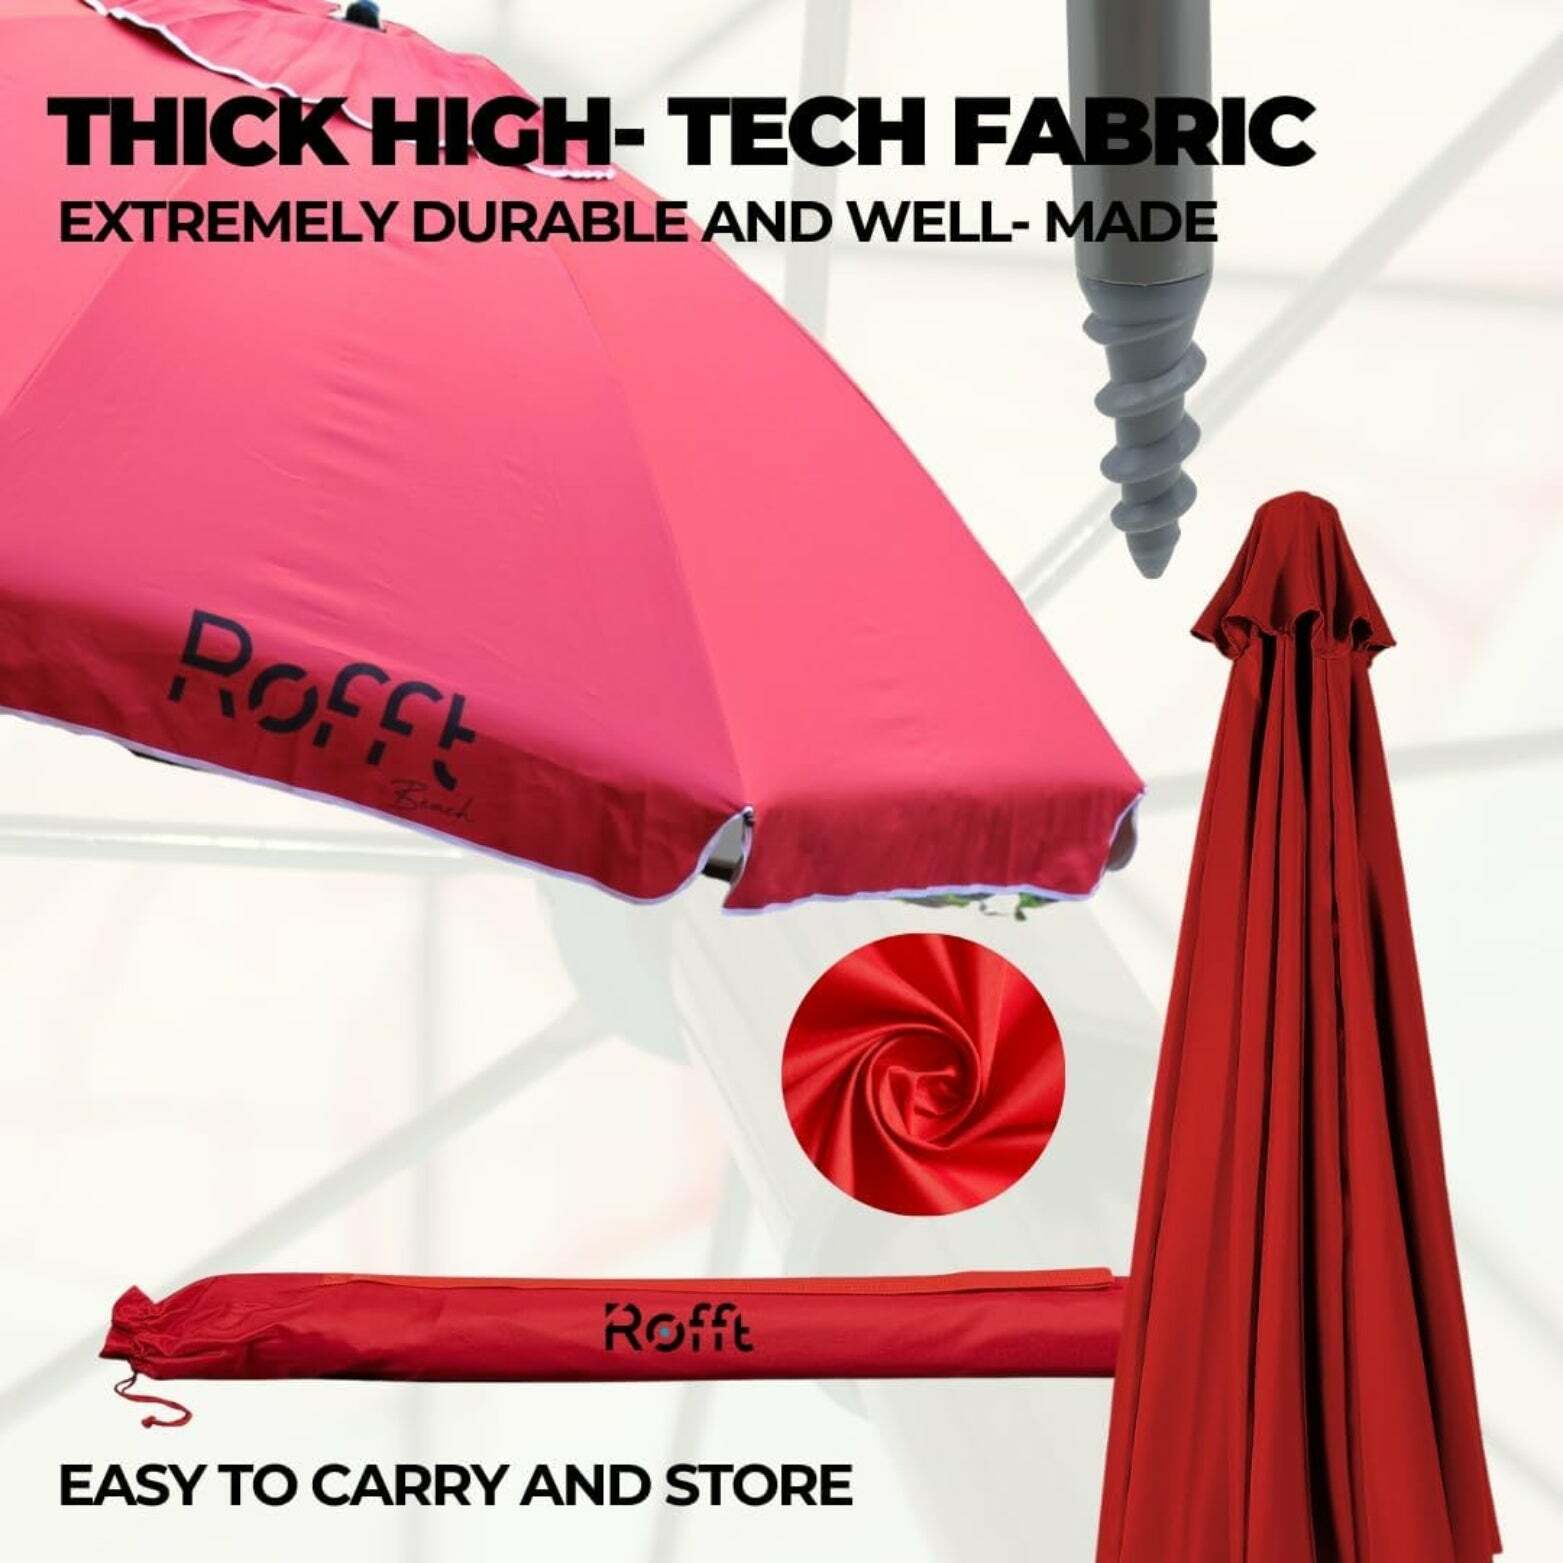 ROFFT Sturdy Beach Umbrella with UV Protection and Windproof Design - 6.5 Ft Coverage, Steel & Aluminum Pole, Tilt Adjustment - Red